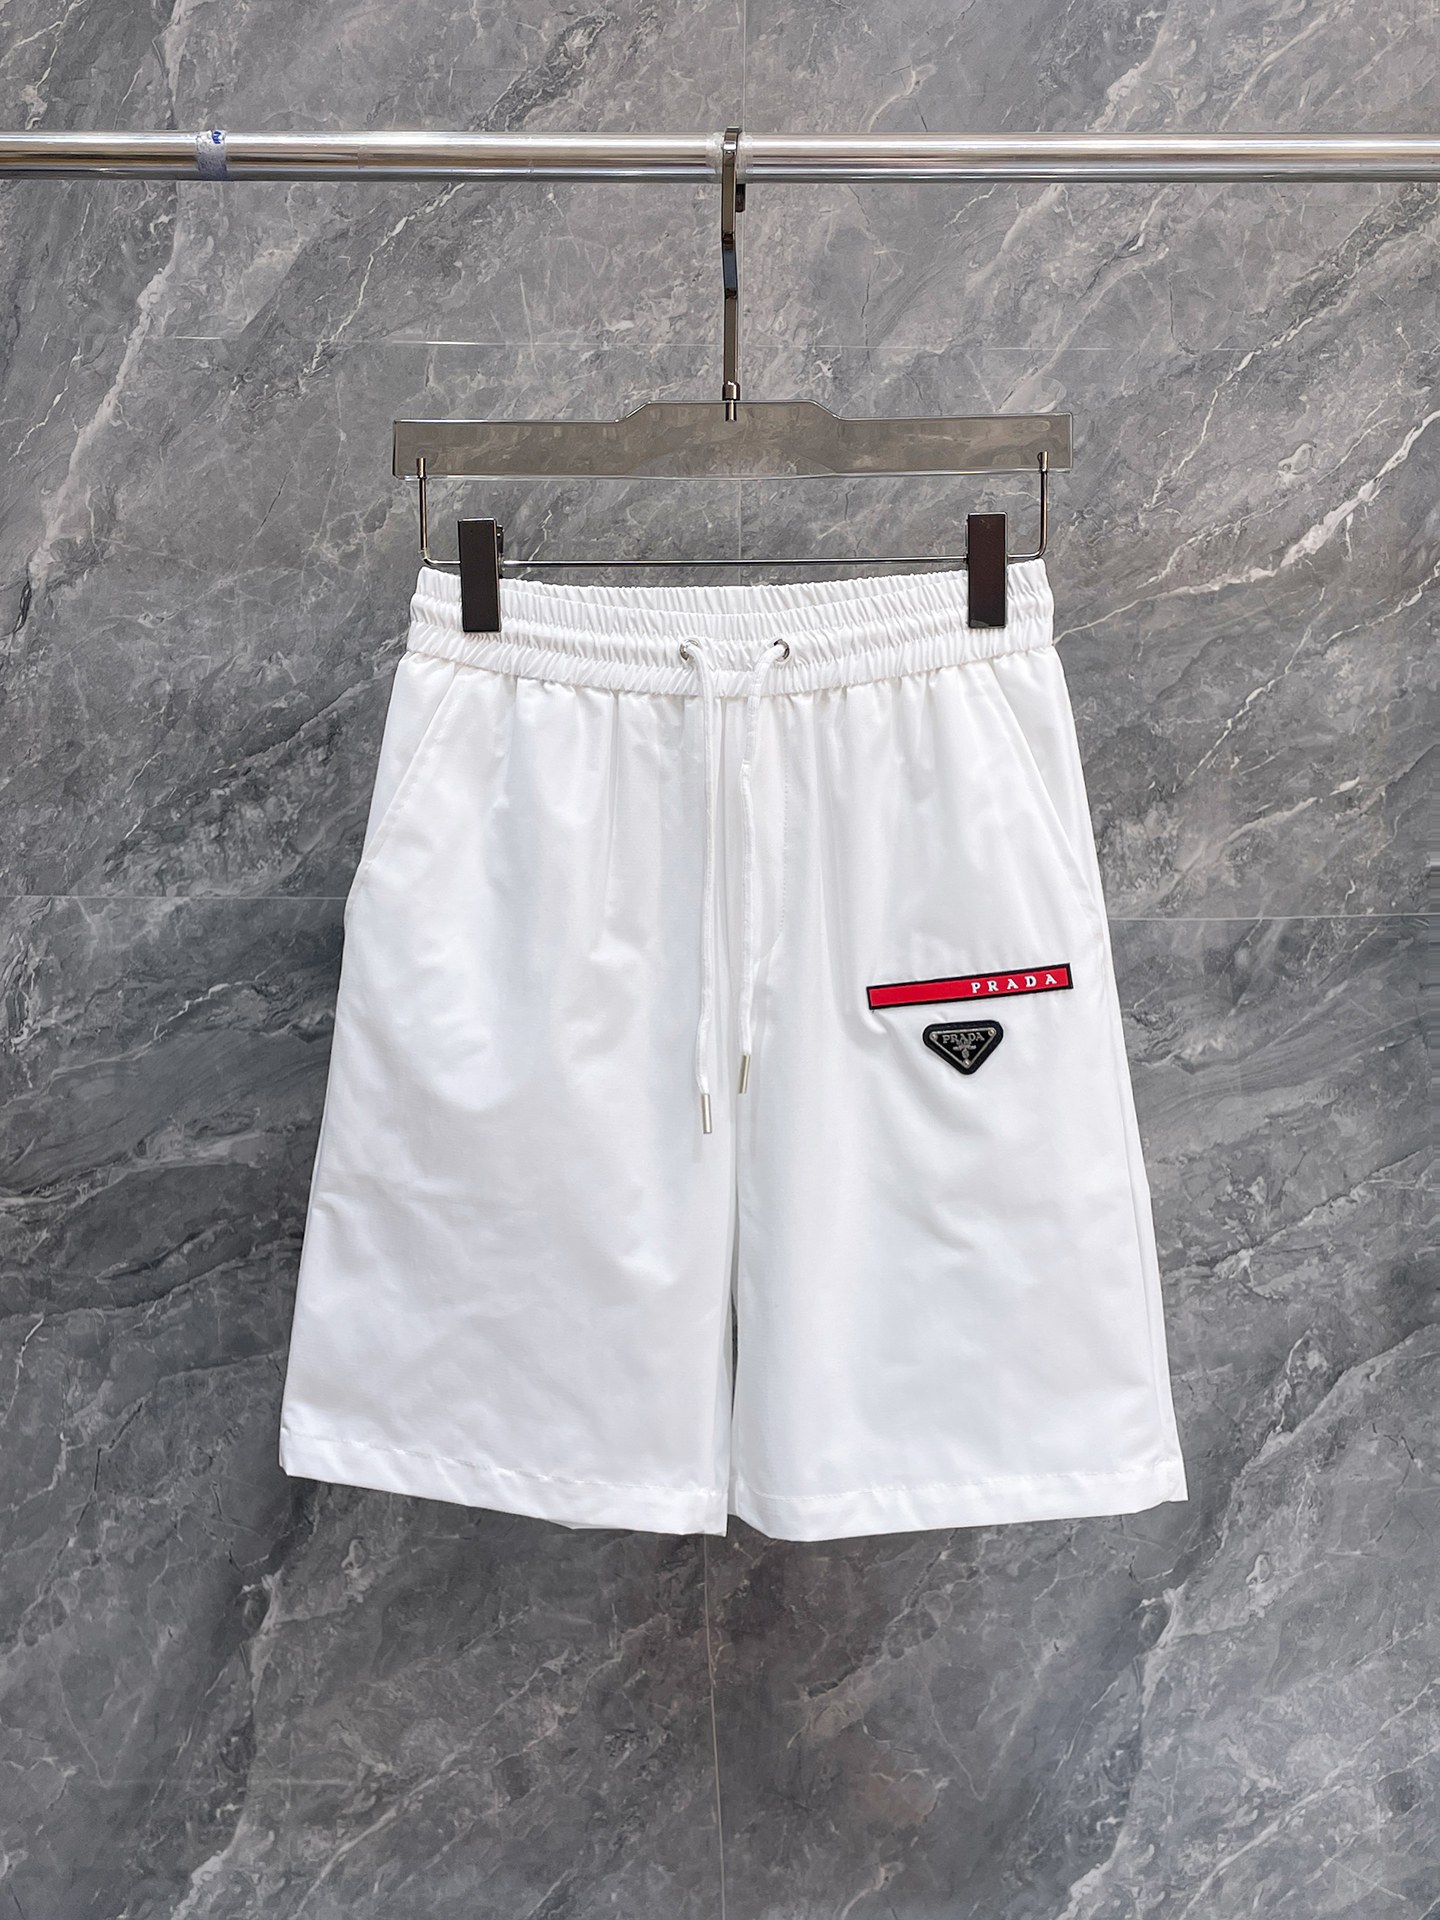 What Best Designer Replicas
 Prada Clothing Shorts Cotton Summer Collection Casual